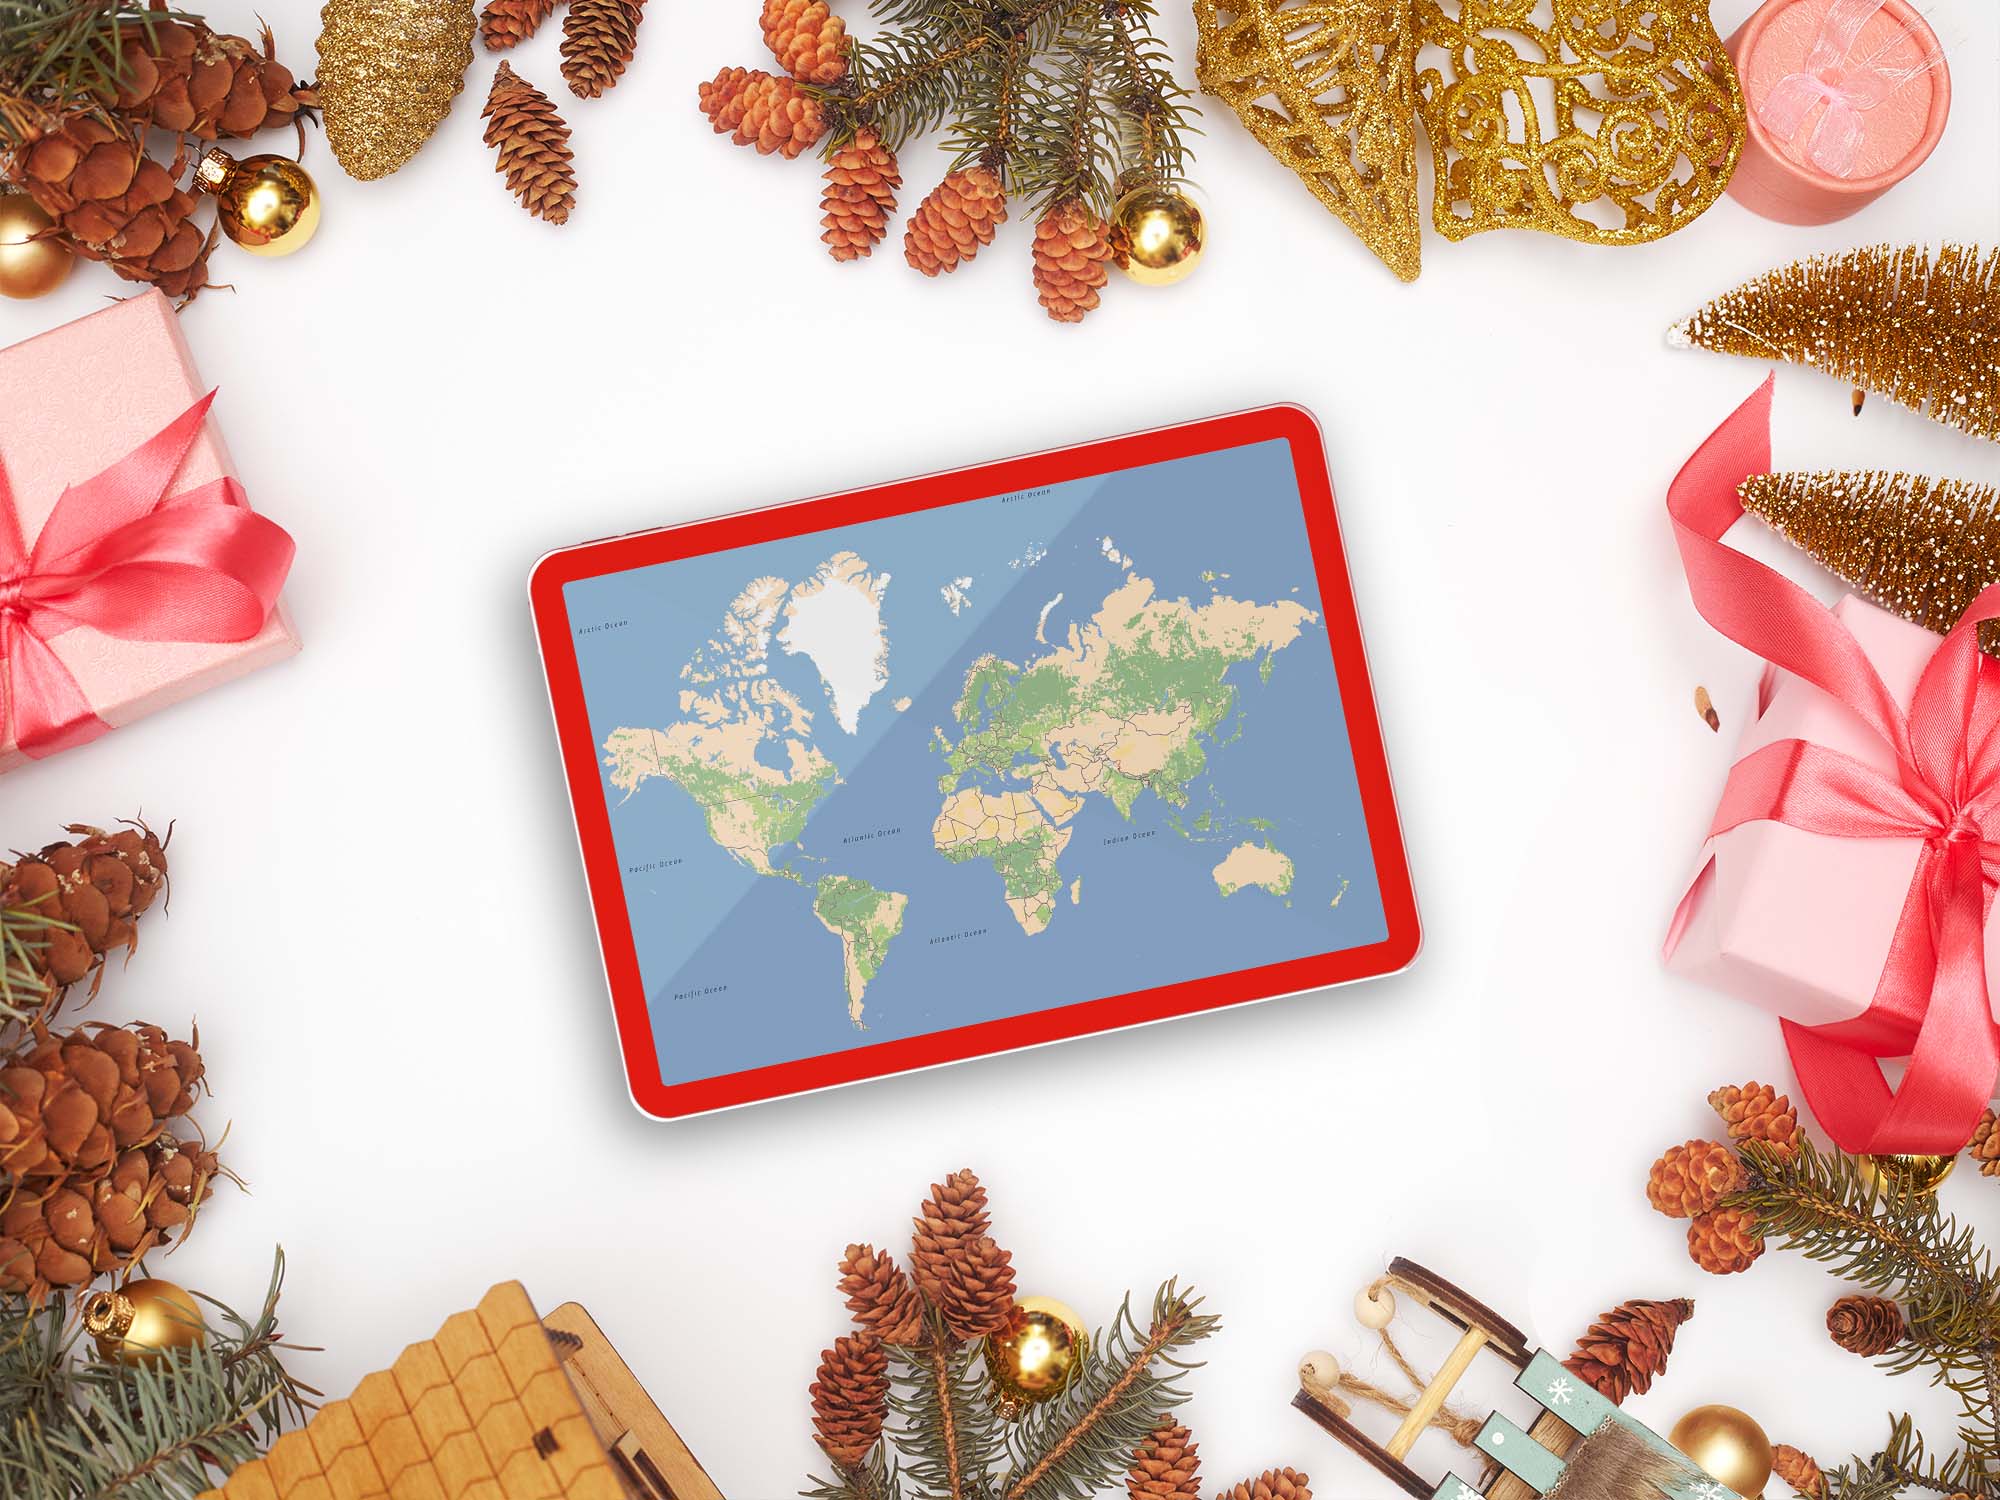 A tablet showing TomTom maps with a border of holiday items